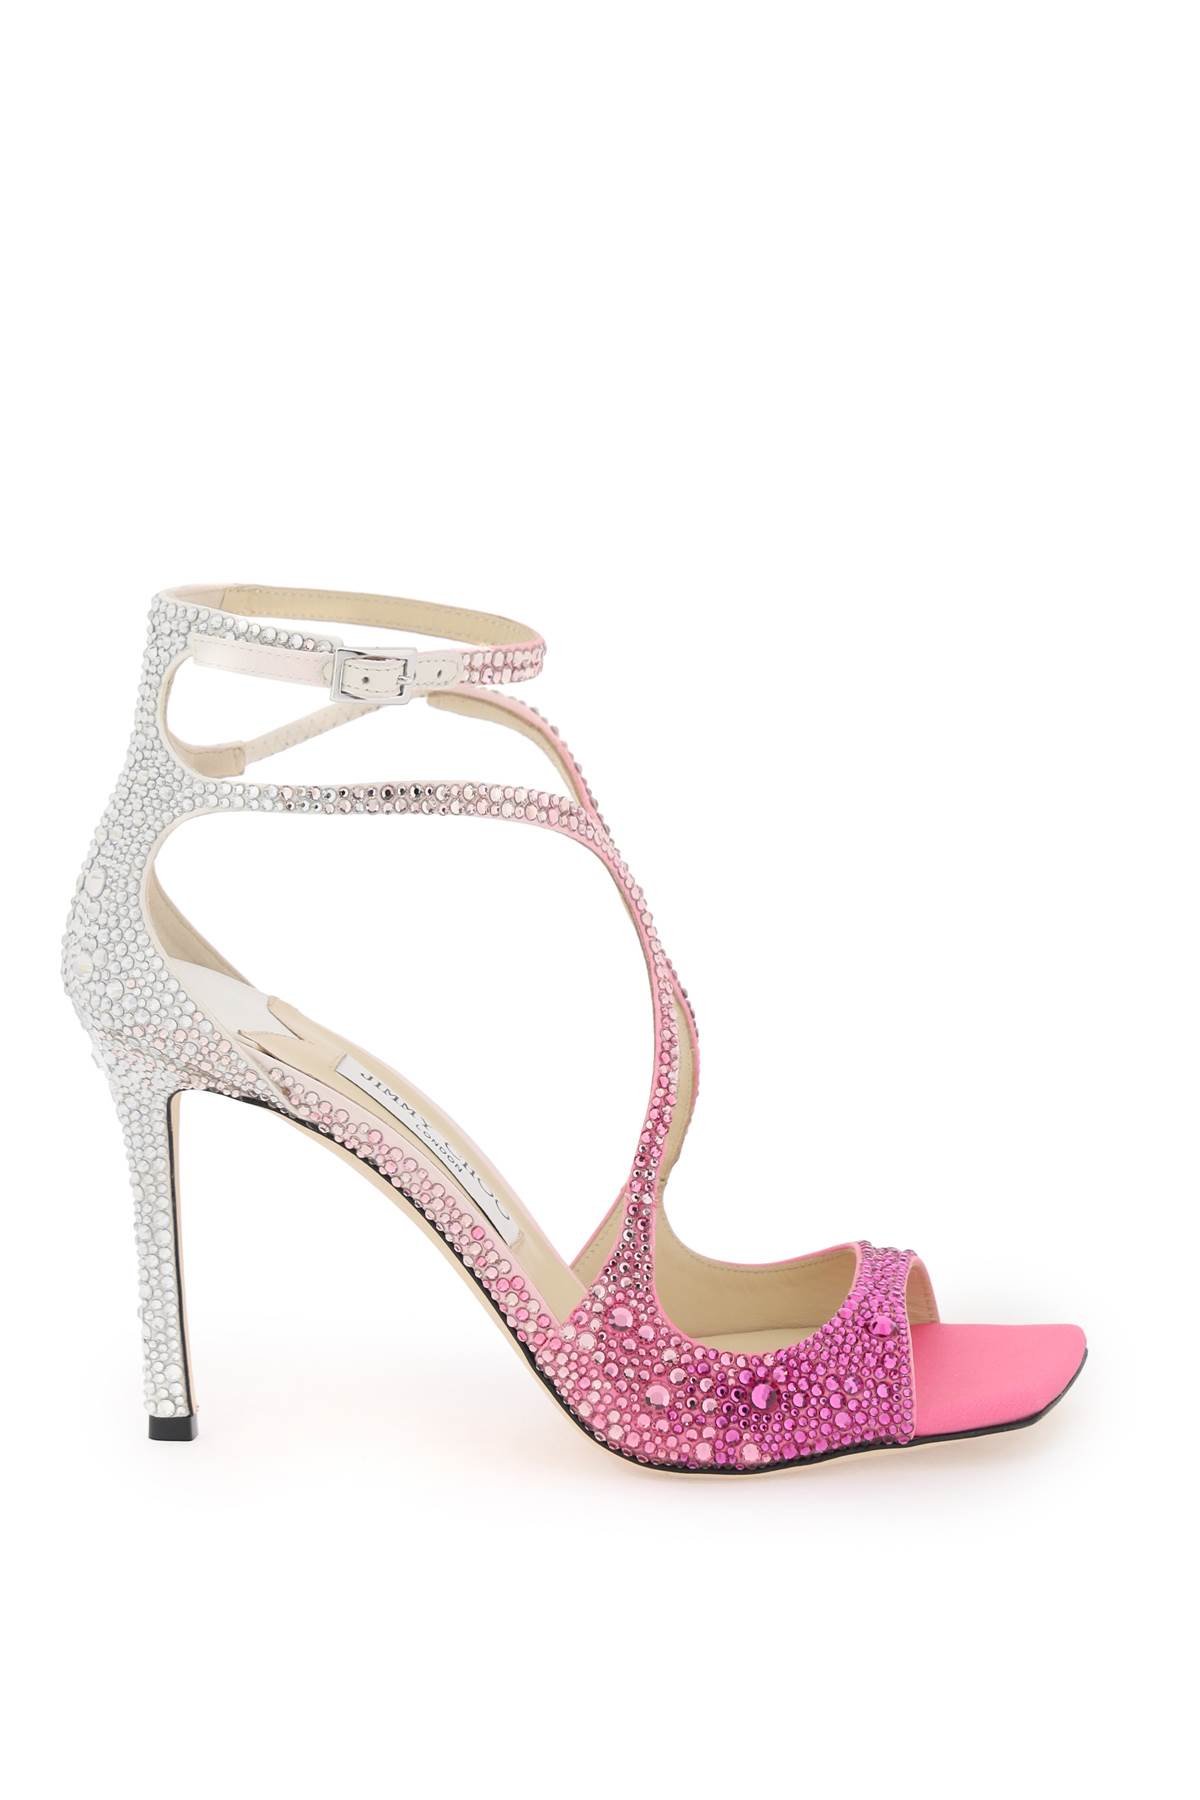 Shop Jimmy Choo Azia 95 Pumps With Crystals In Candy Pink Crystal (fuchsia)